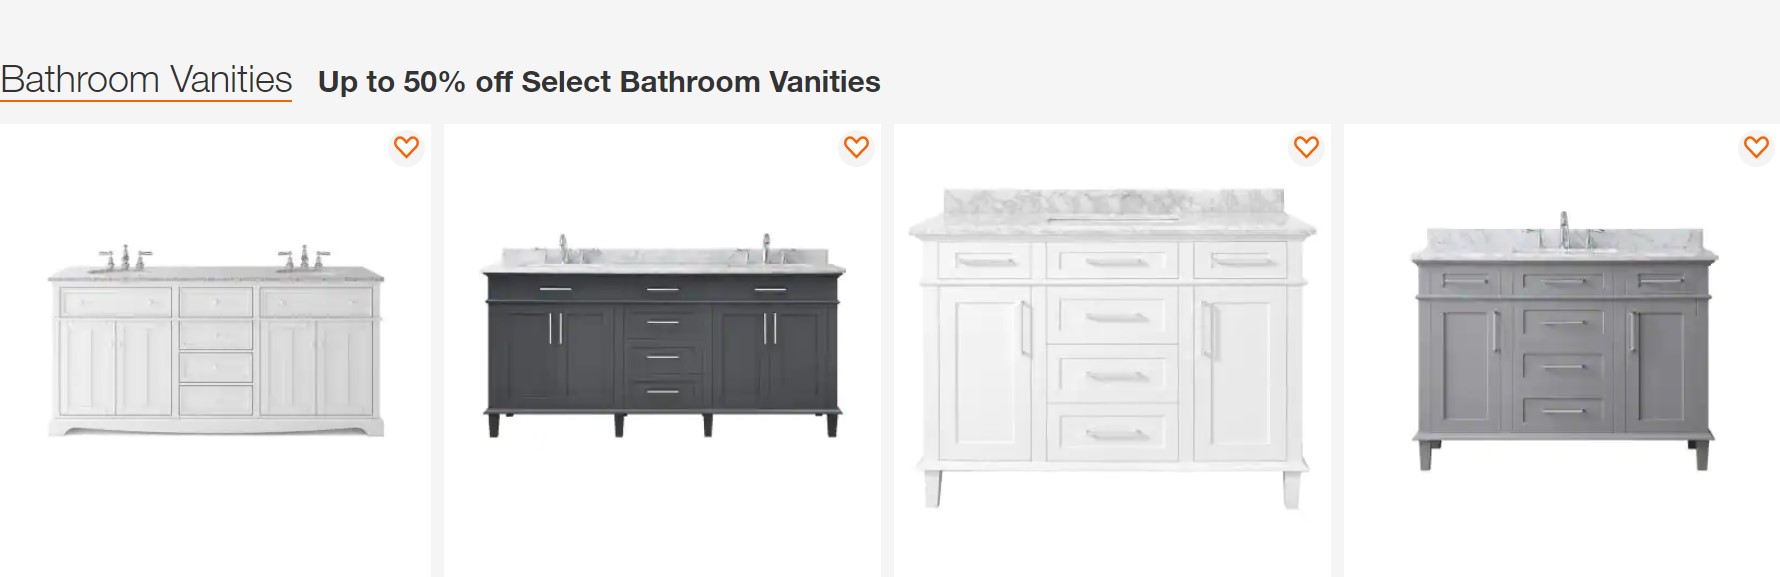 Save BIG On Vanities at Home Depot!   TODAY ONLY!